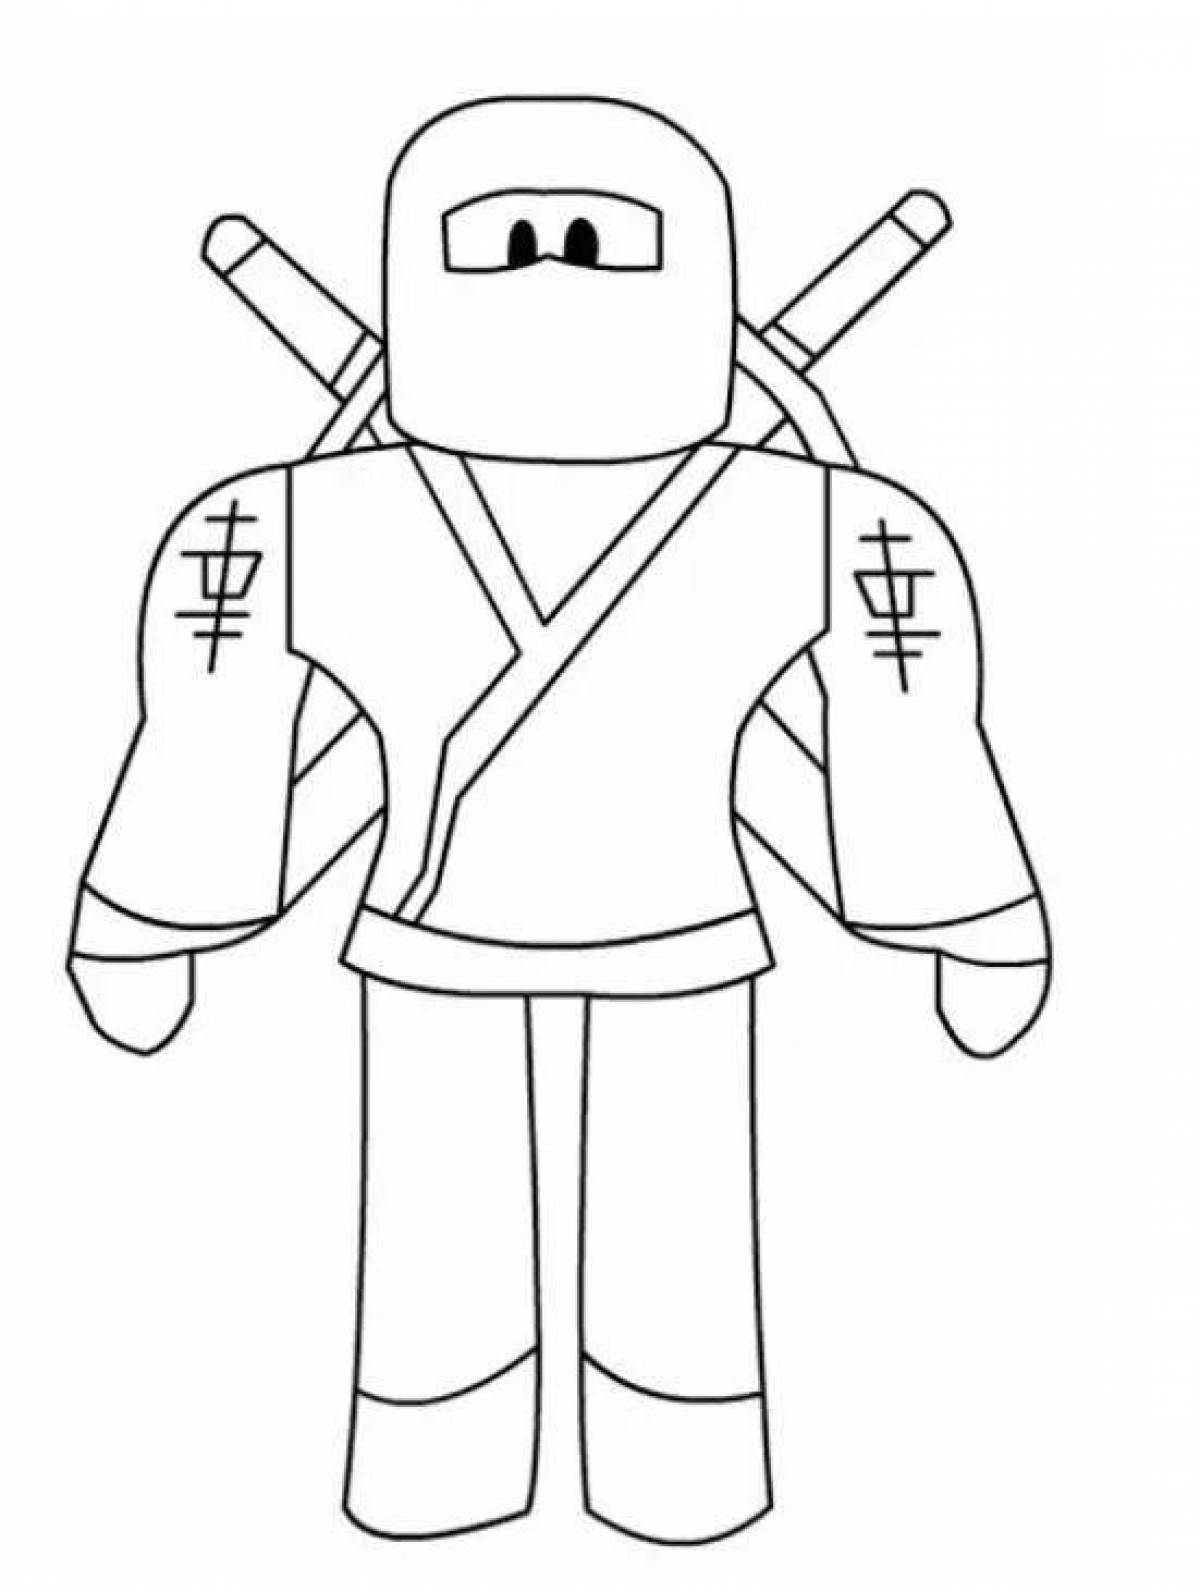 Playful roblox men coloring page